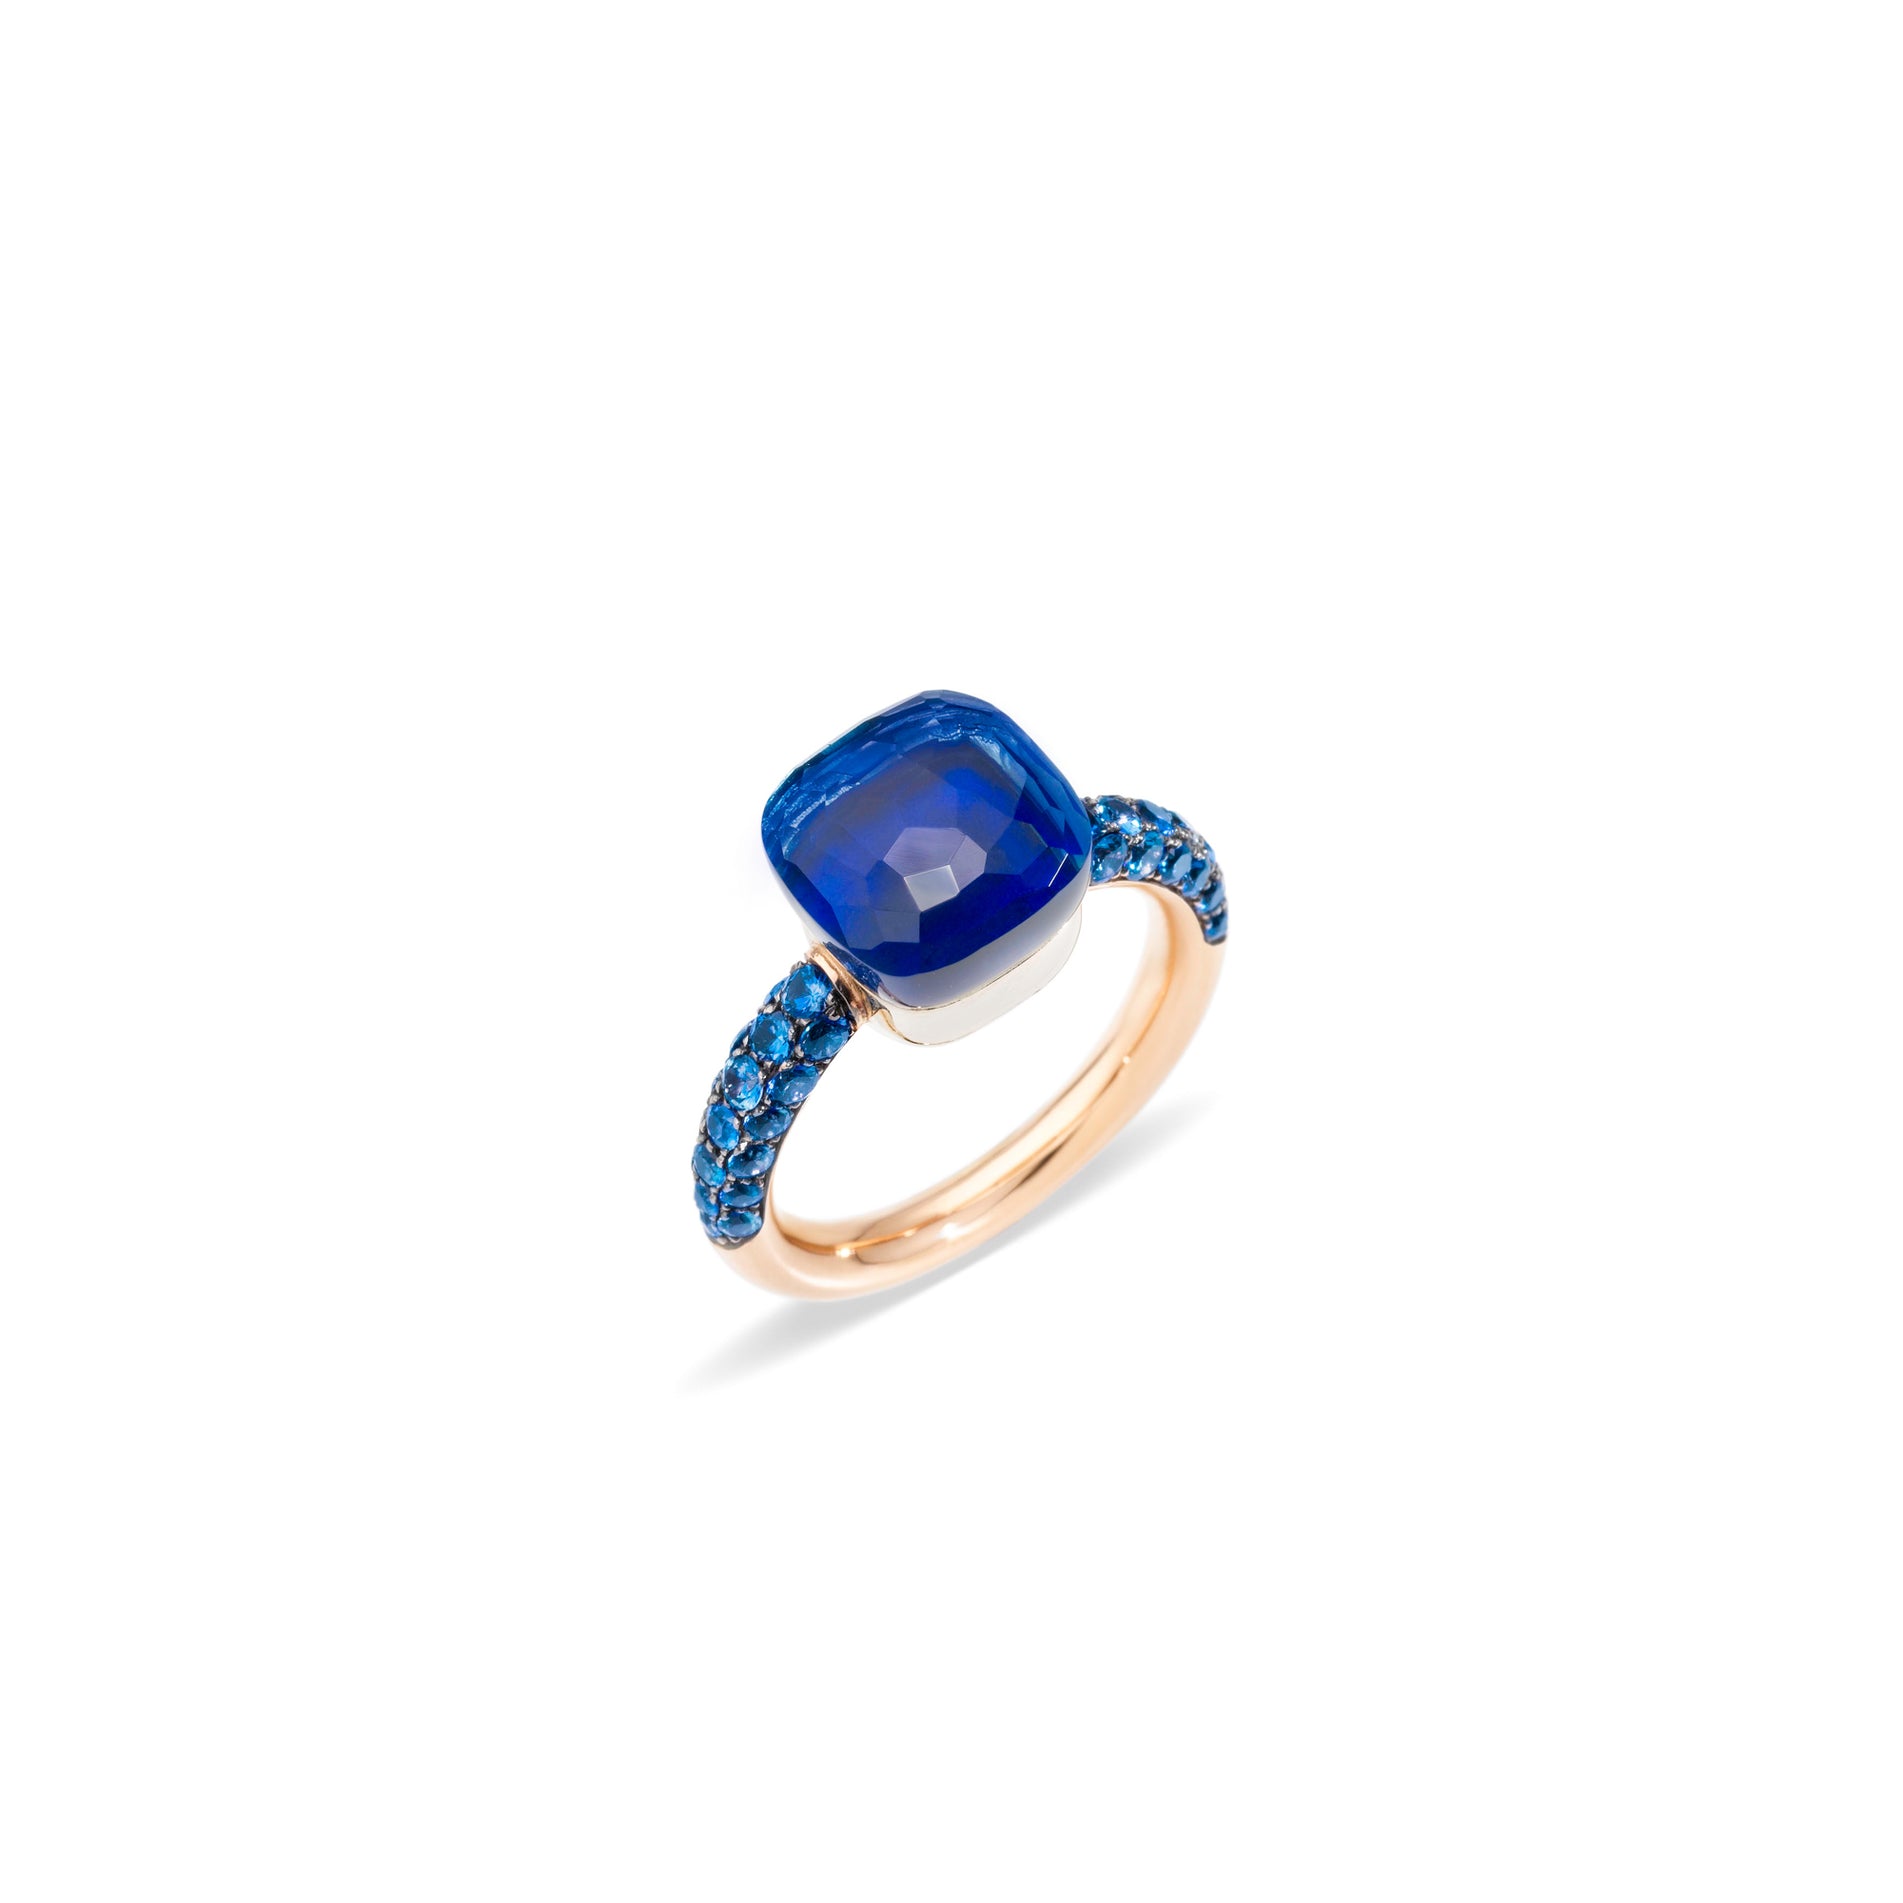 Nudo Deep Blue Ring in 18k Rose Gold and White Gold with London Blue Topaz, Lapis and Diffused Topaz - Orsini Jewellers NZ